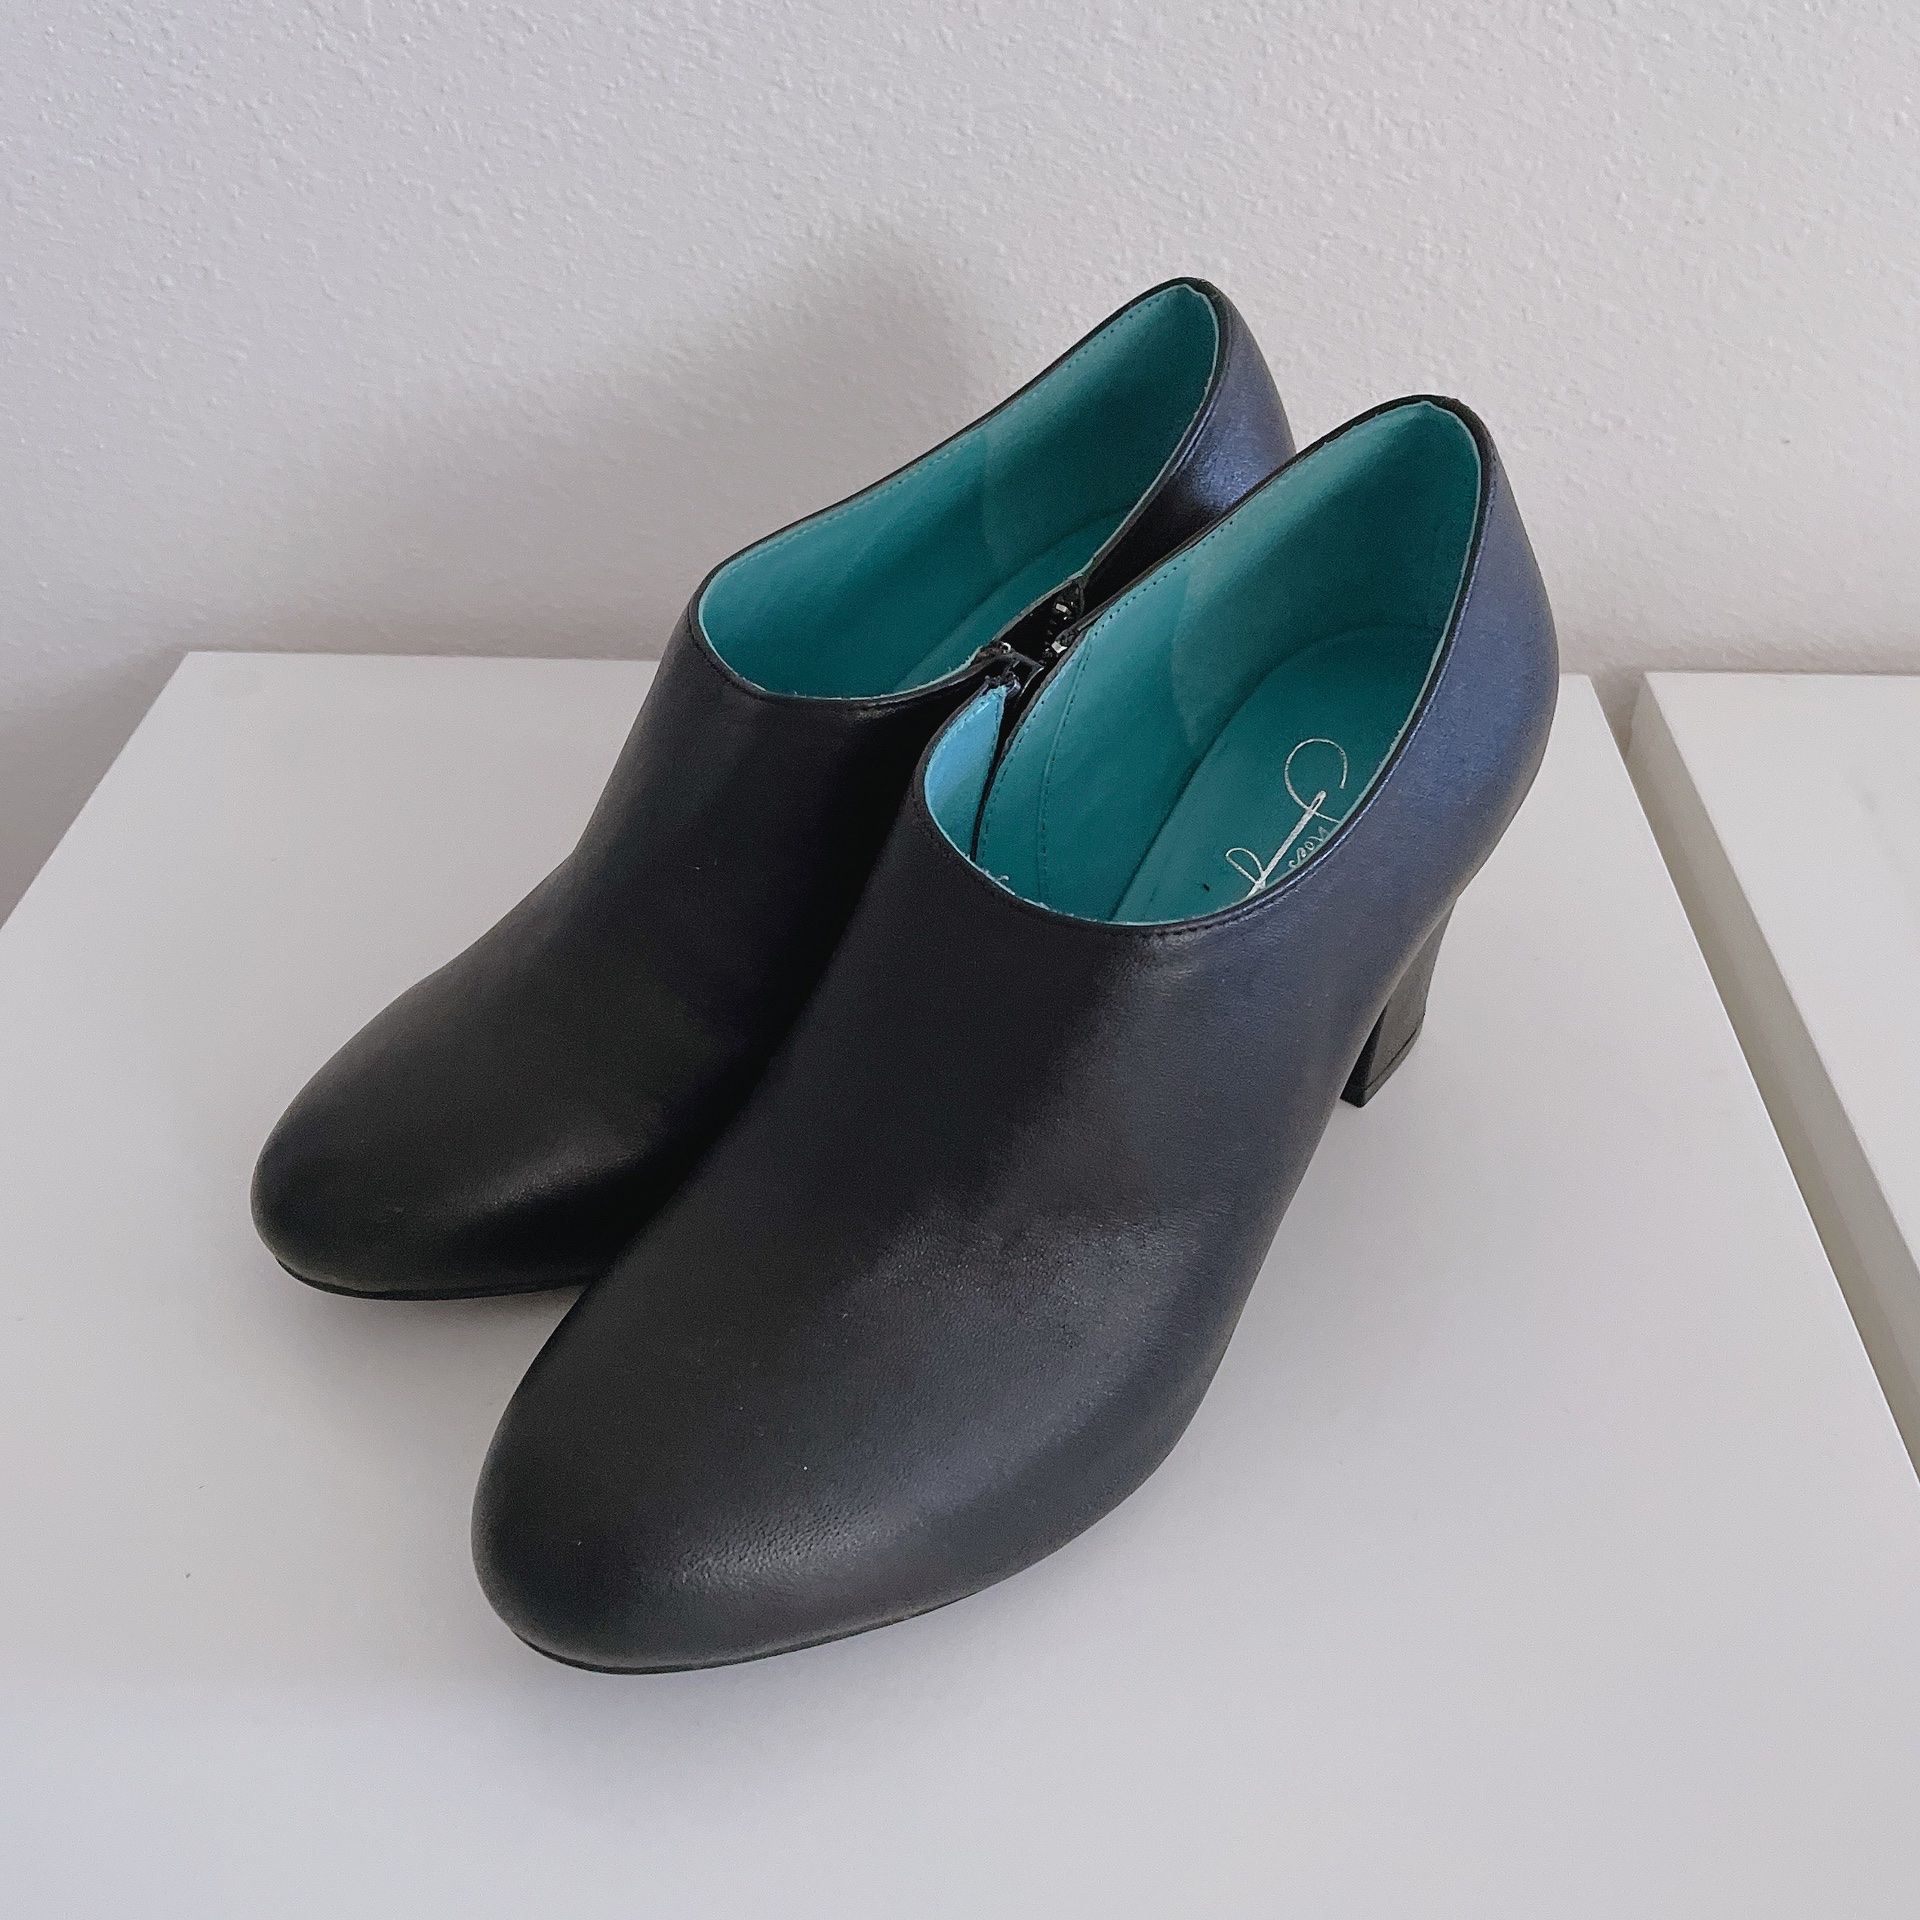 Shoes Heel Leather Womens Size 37 or 7